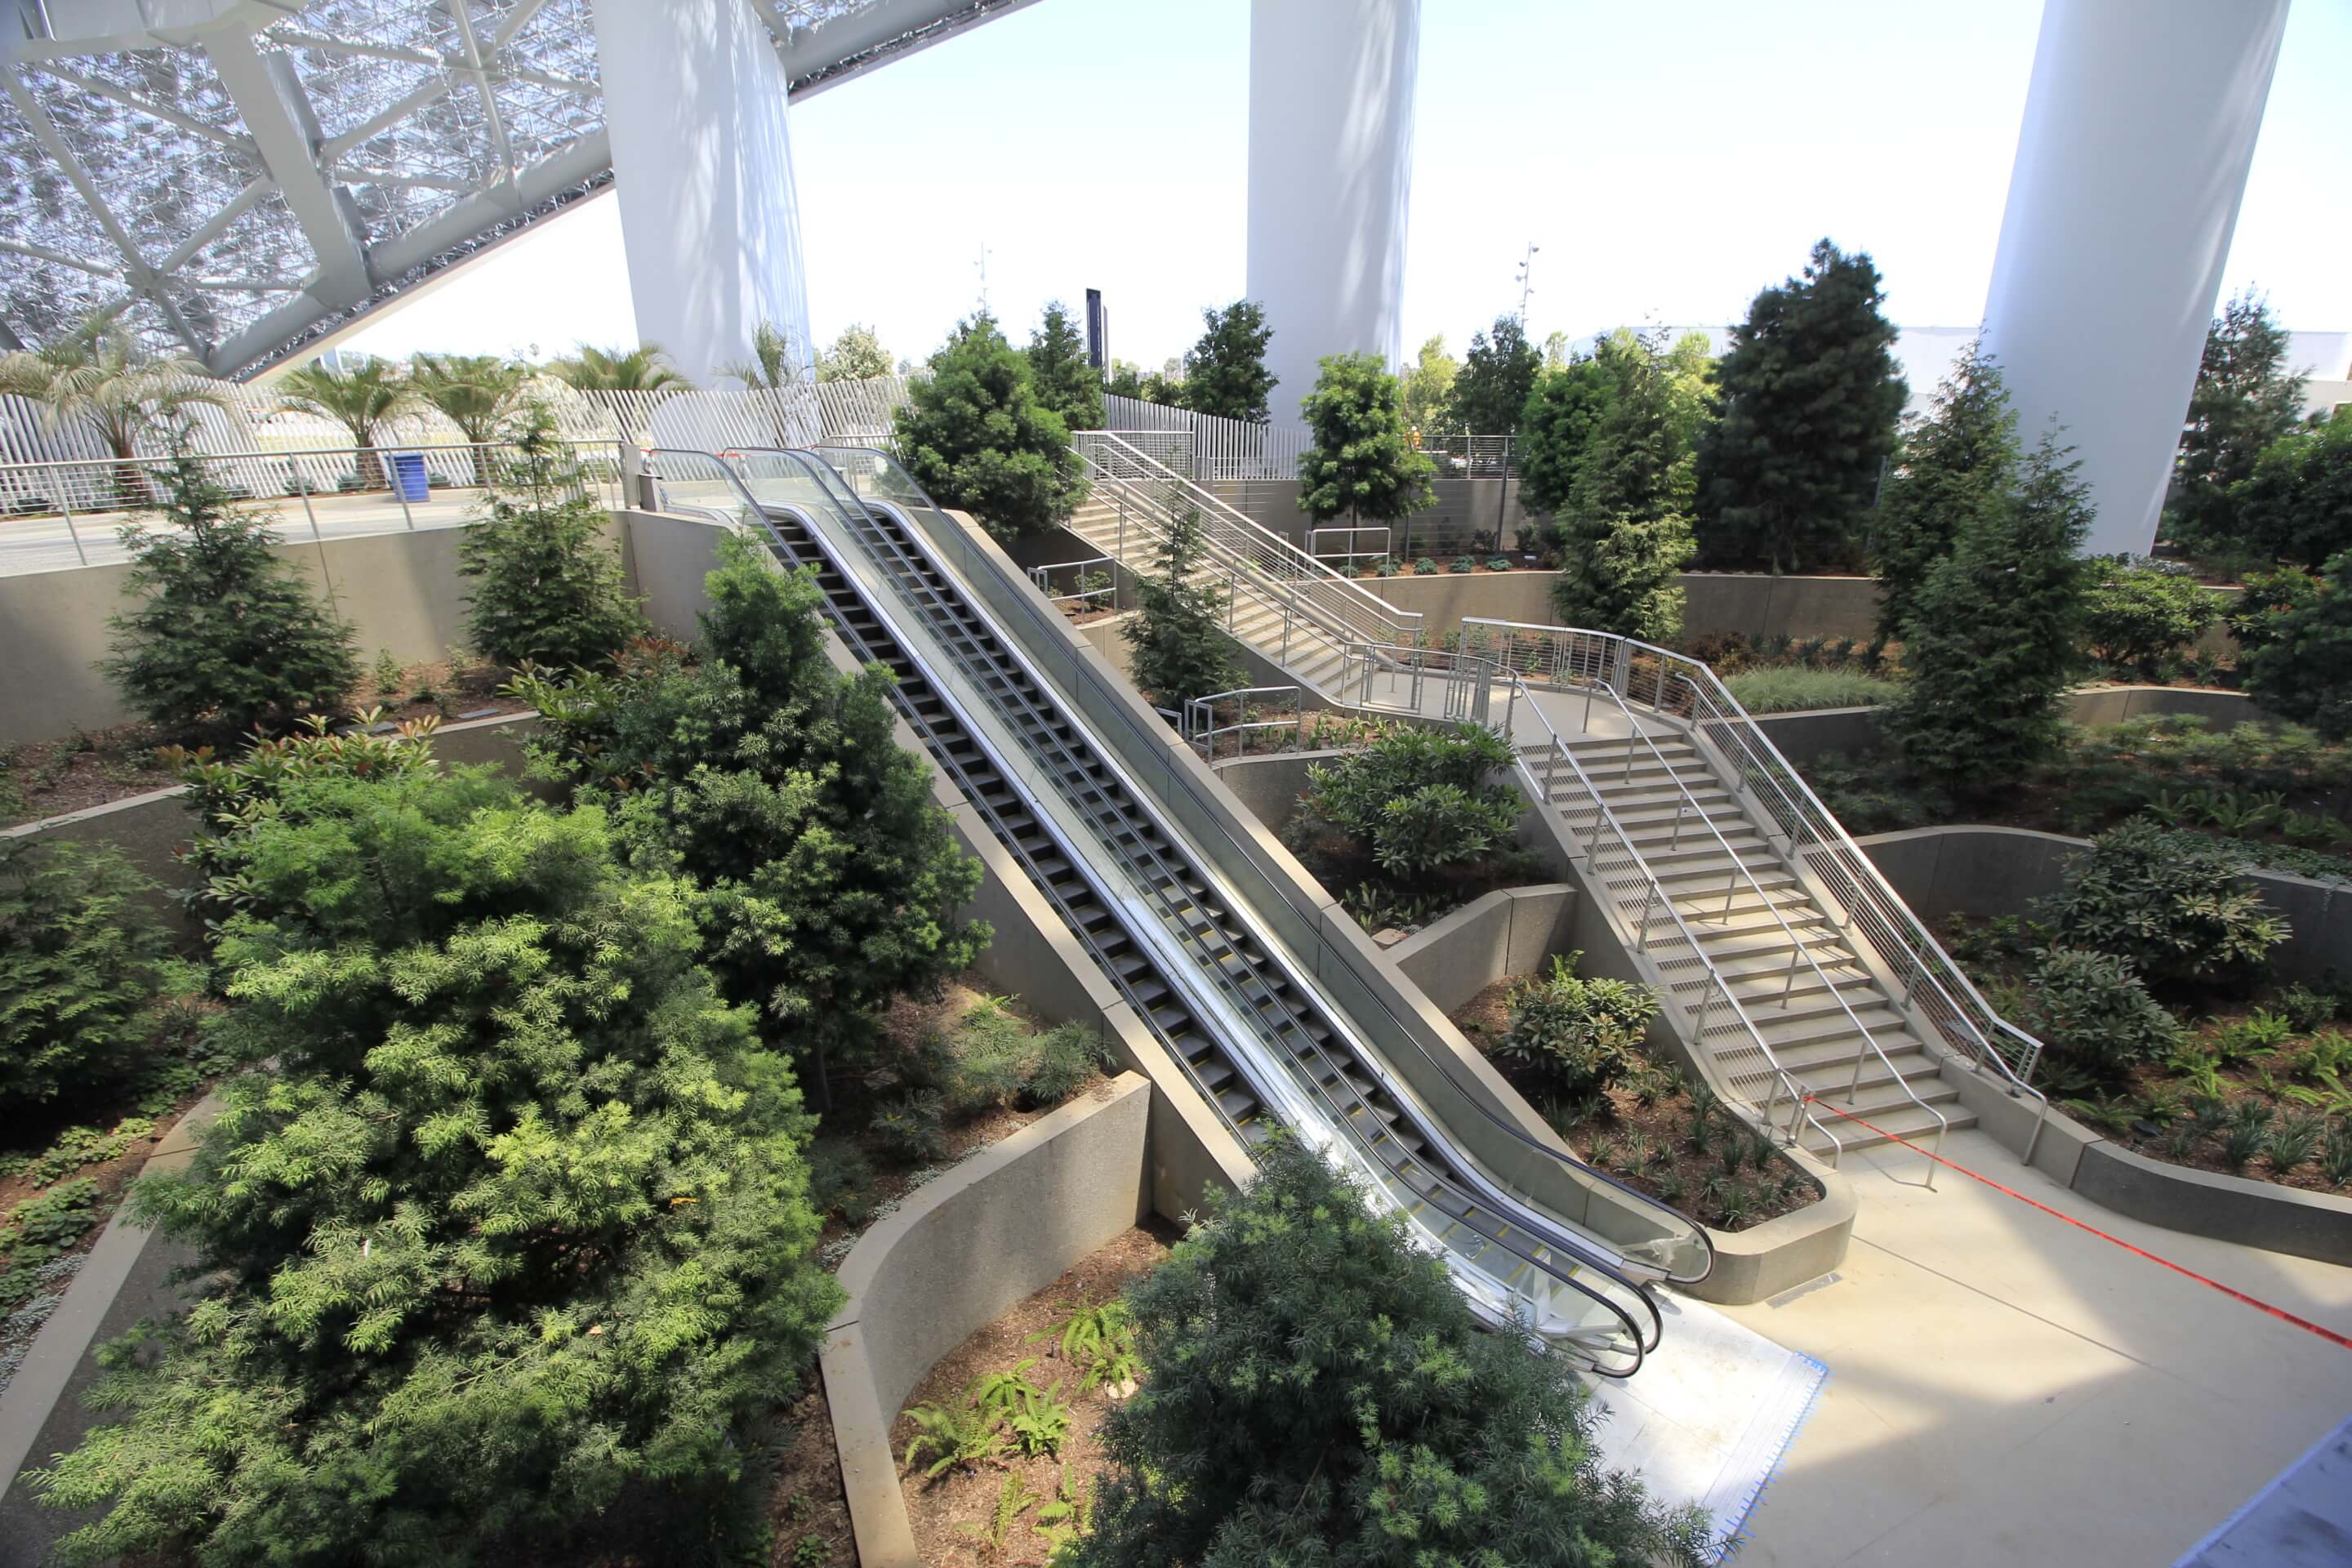 a terraced covered landscape with escalators